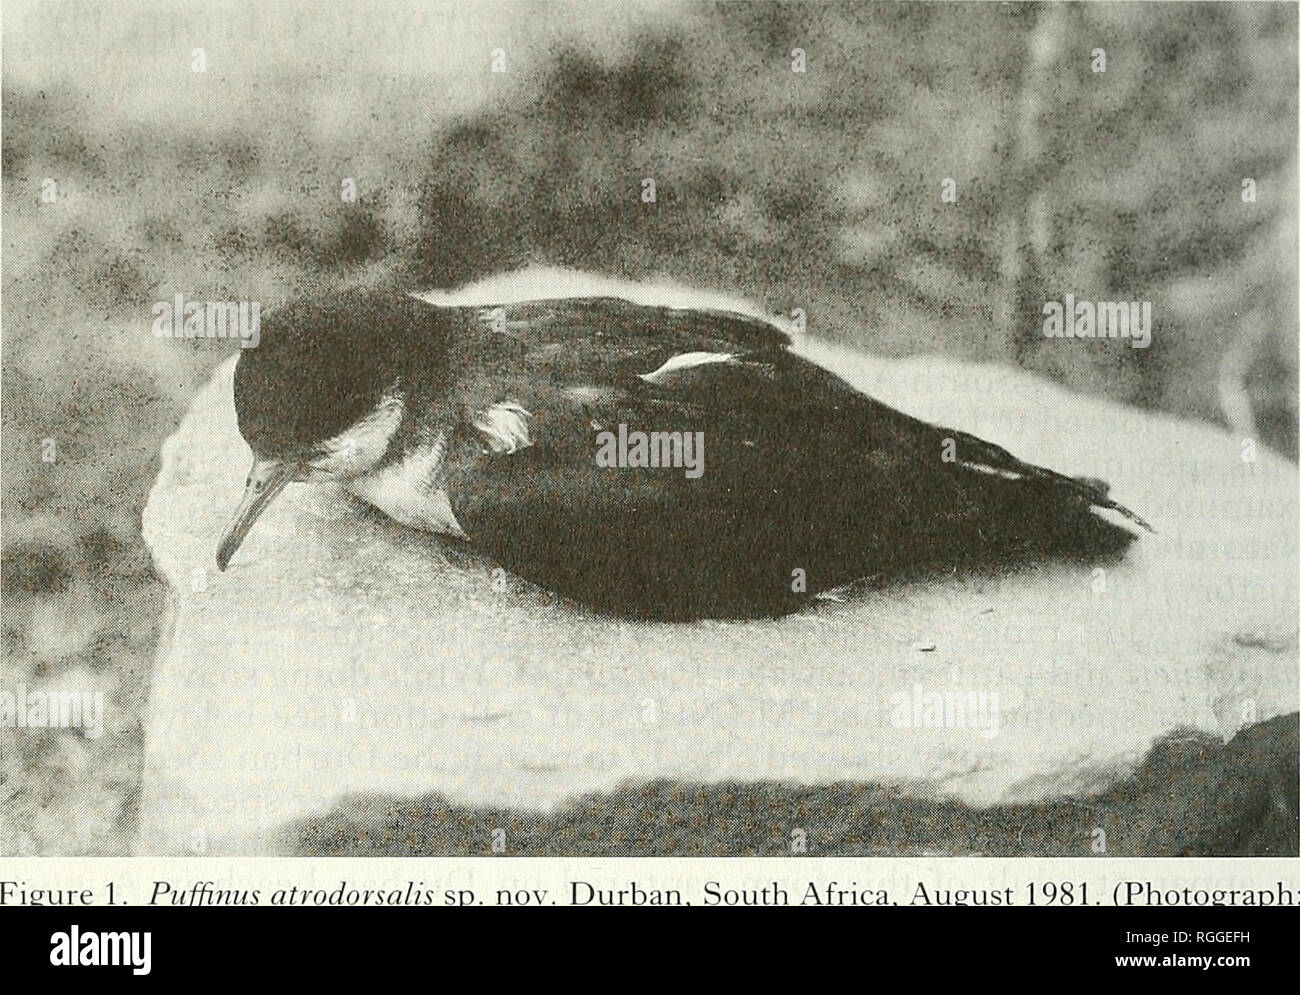 . Bulletin of the British Ornithologists' Club. Birds. H. Shirihai et al. 76 Bull. B.O.C. 1995 115(2). Figure 1. Puffinus atrodorsalis sp. nov. Durban, South Africa, August 1' Ian Sinclair.) 1. (Photograph: Freeze-dried specimen lodged in the Durban Natural Science Museum, DNSM No. 36093. Diagnosis. Medium-sized shearwater with characteristic black-and- white plumage and distinctive, hooded appearance of head. Relatively long wings and tail, as well as bill, approaching P. puffinus in proportions, but in length distinctly smaller (i.e. overall size c. 15% smaller), and in this respect closer t Stock Photo